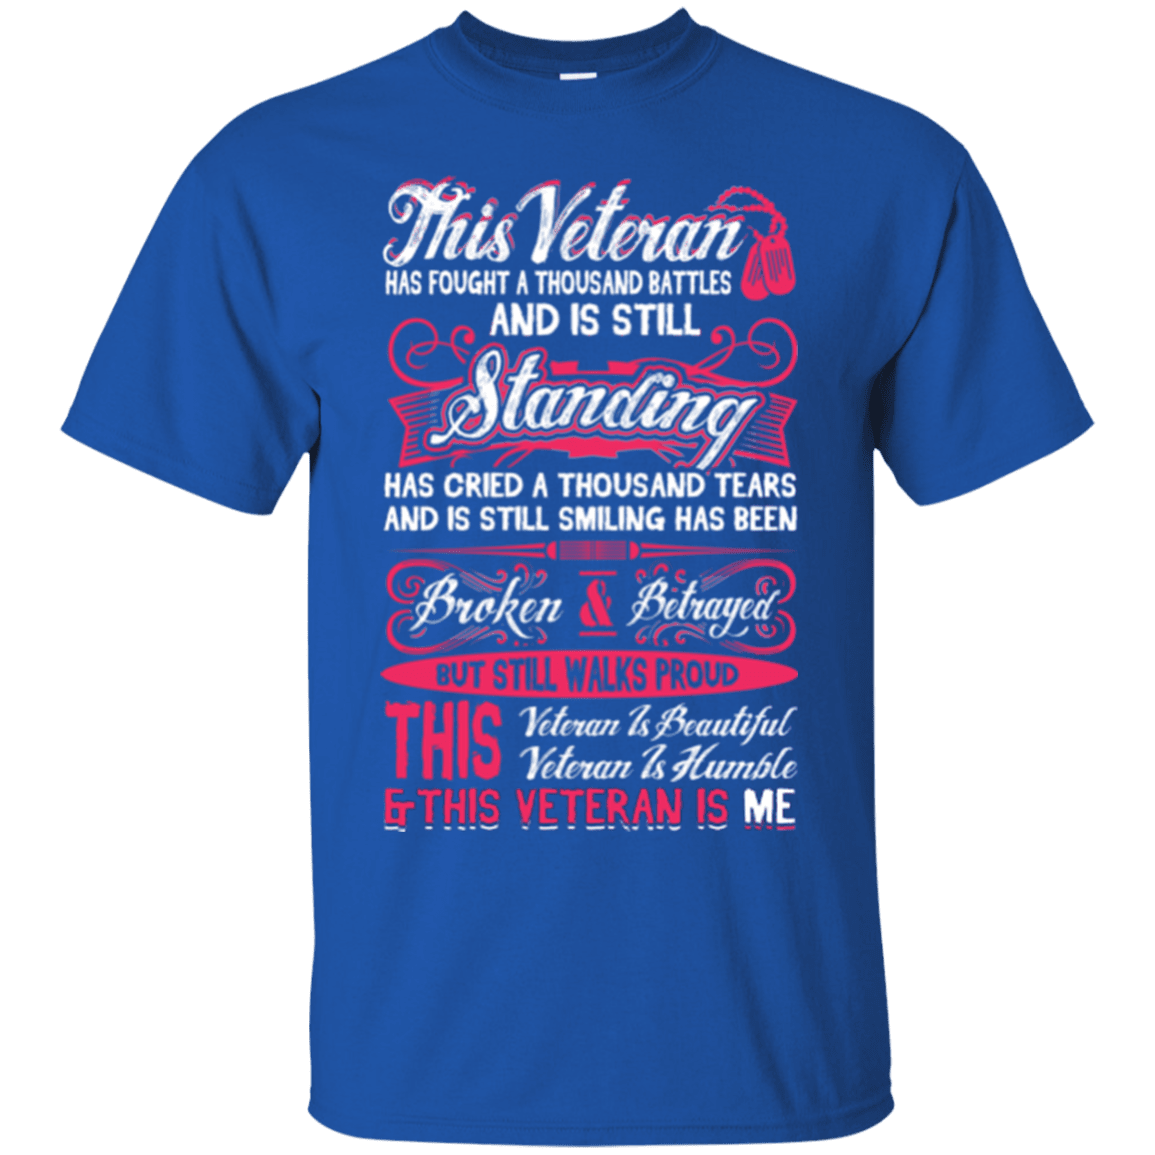 Military T-Shirt "This Veteran is Beautiful and Humble Women" Front-TShirt-General-Veterans Nation